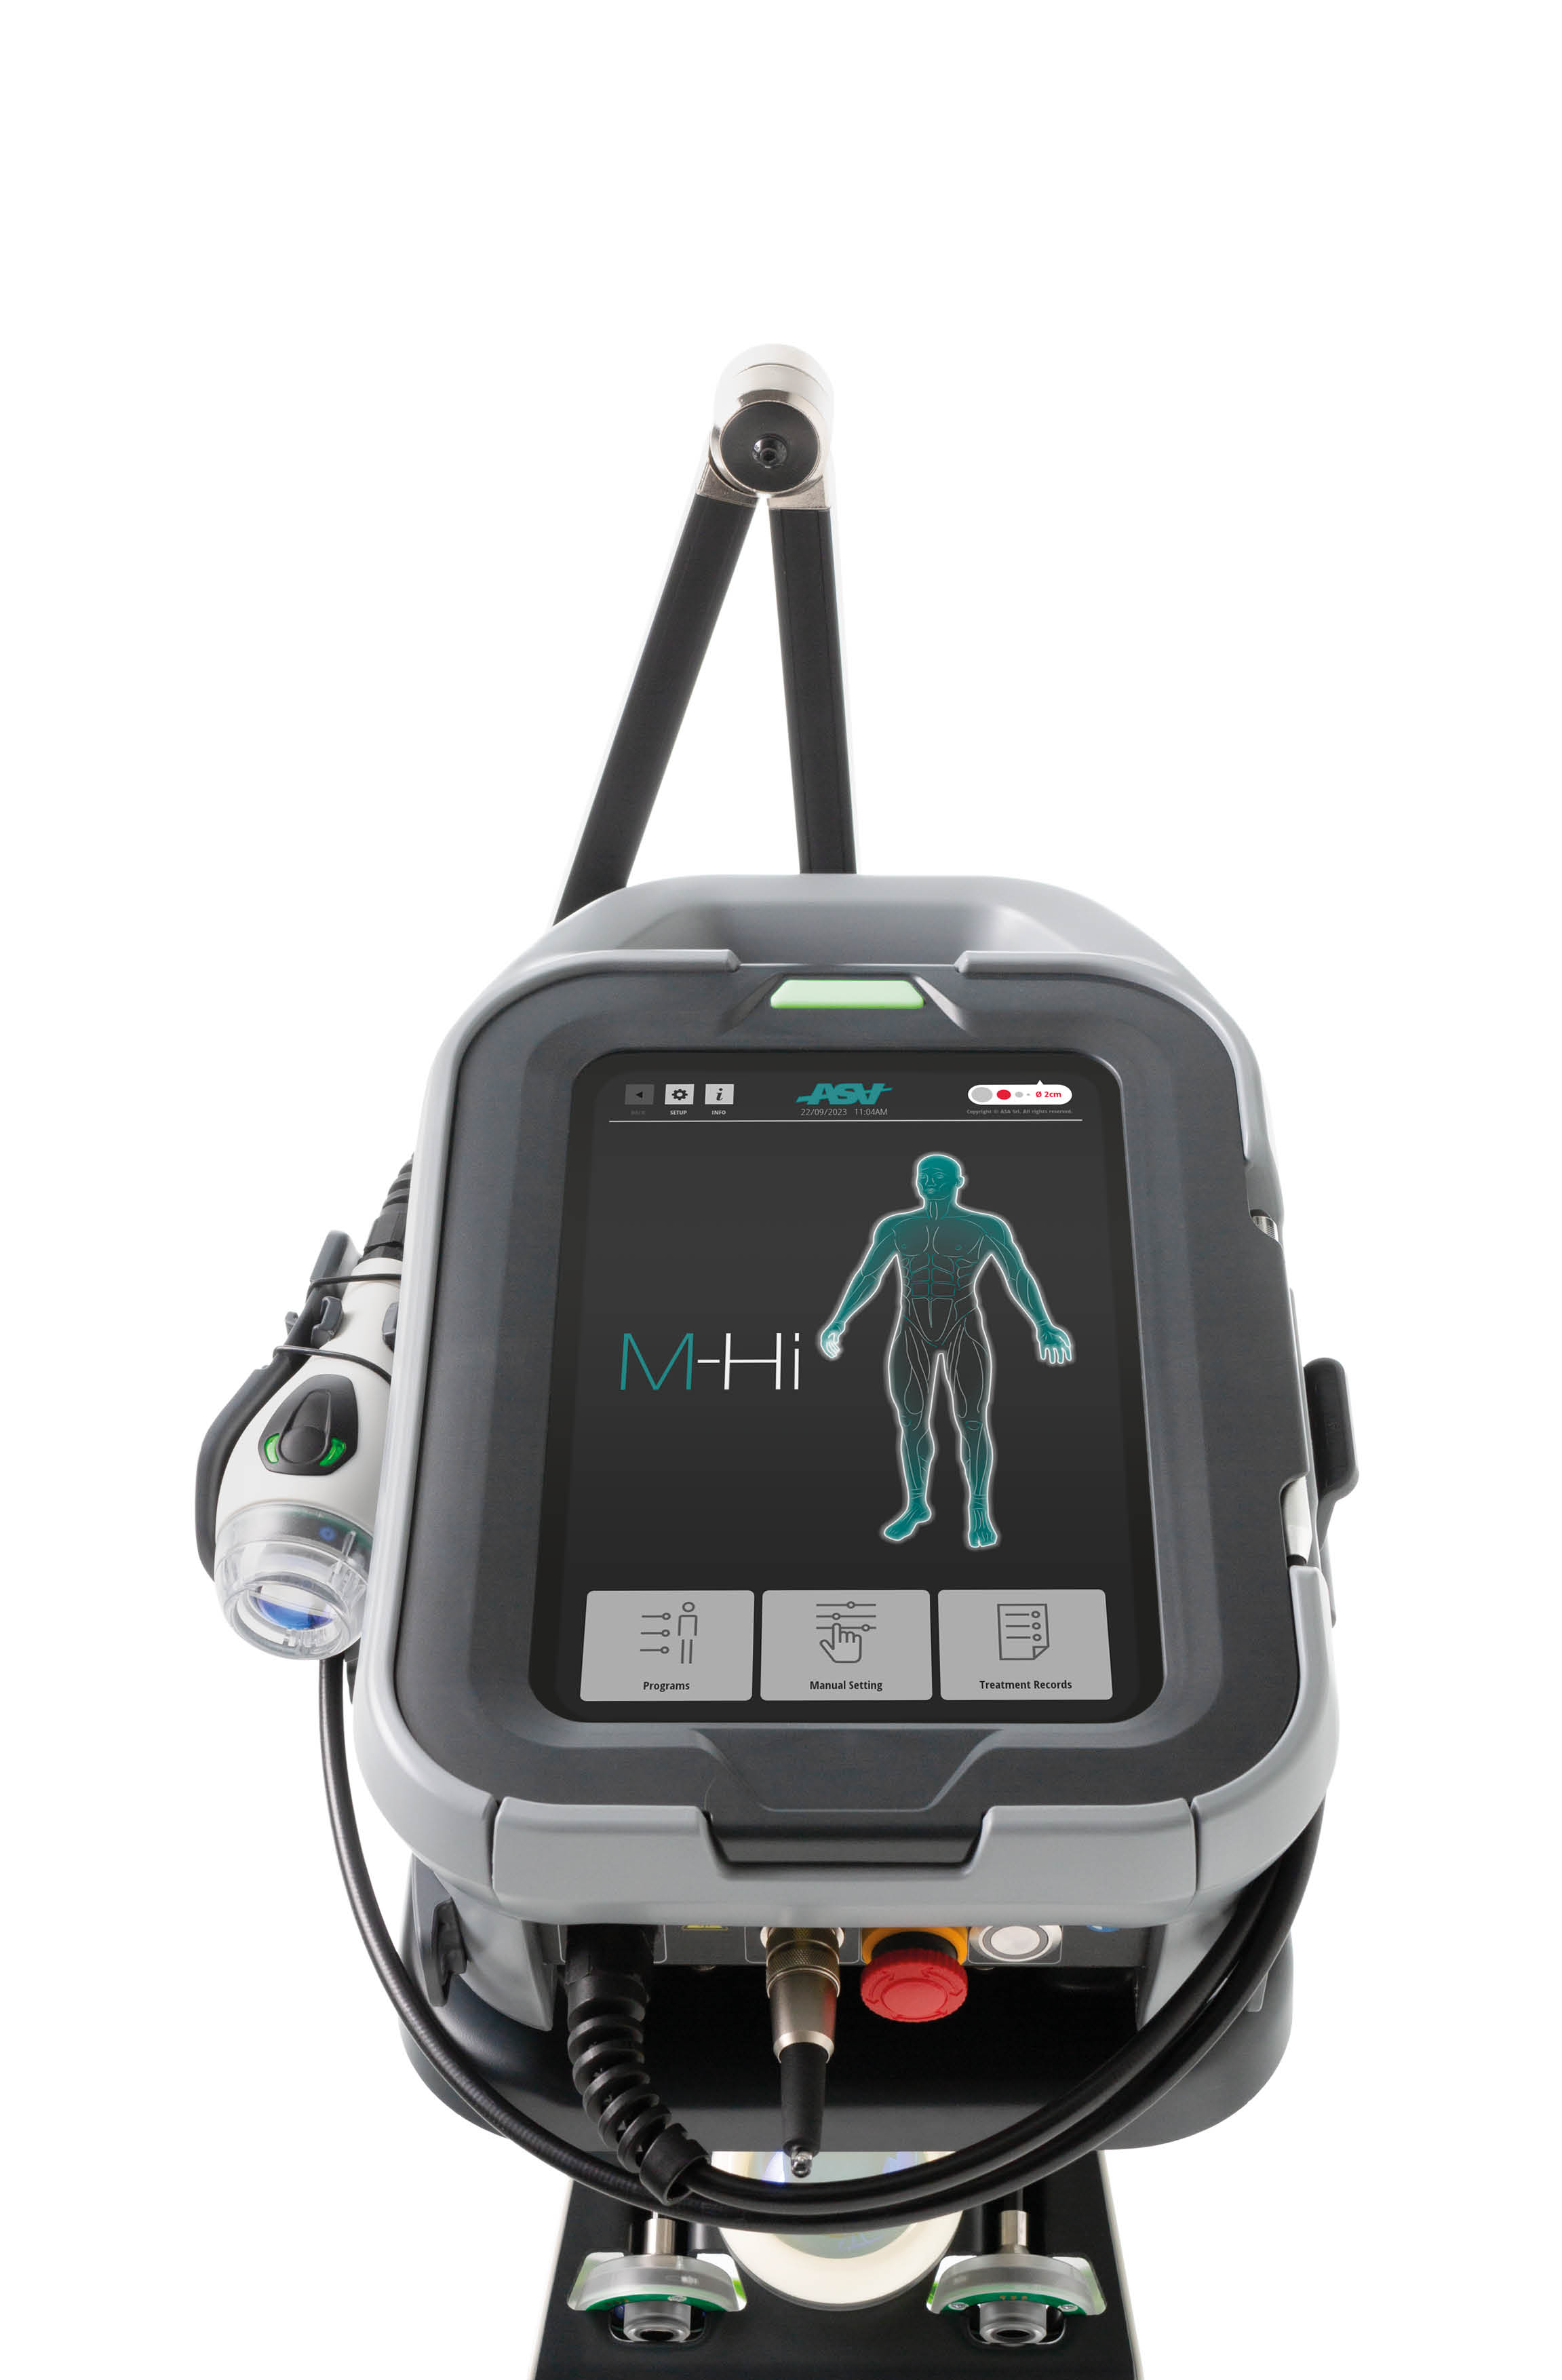 M-Hi laser device - MLS Laser Therapy